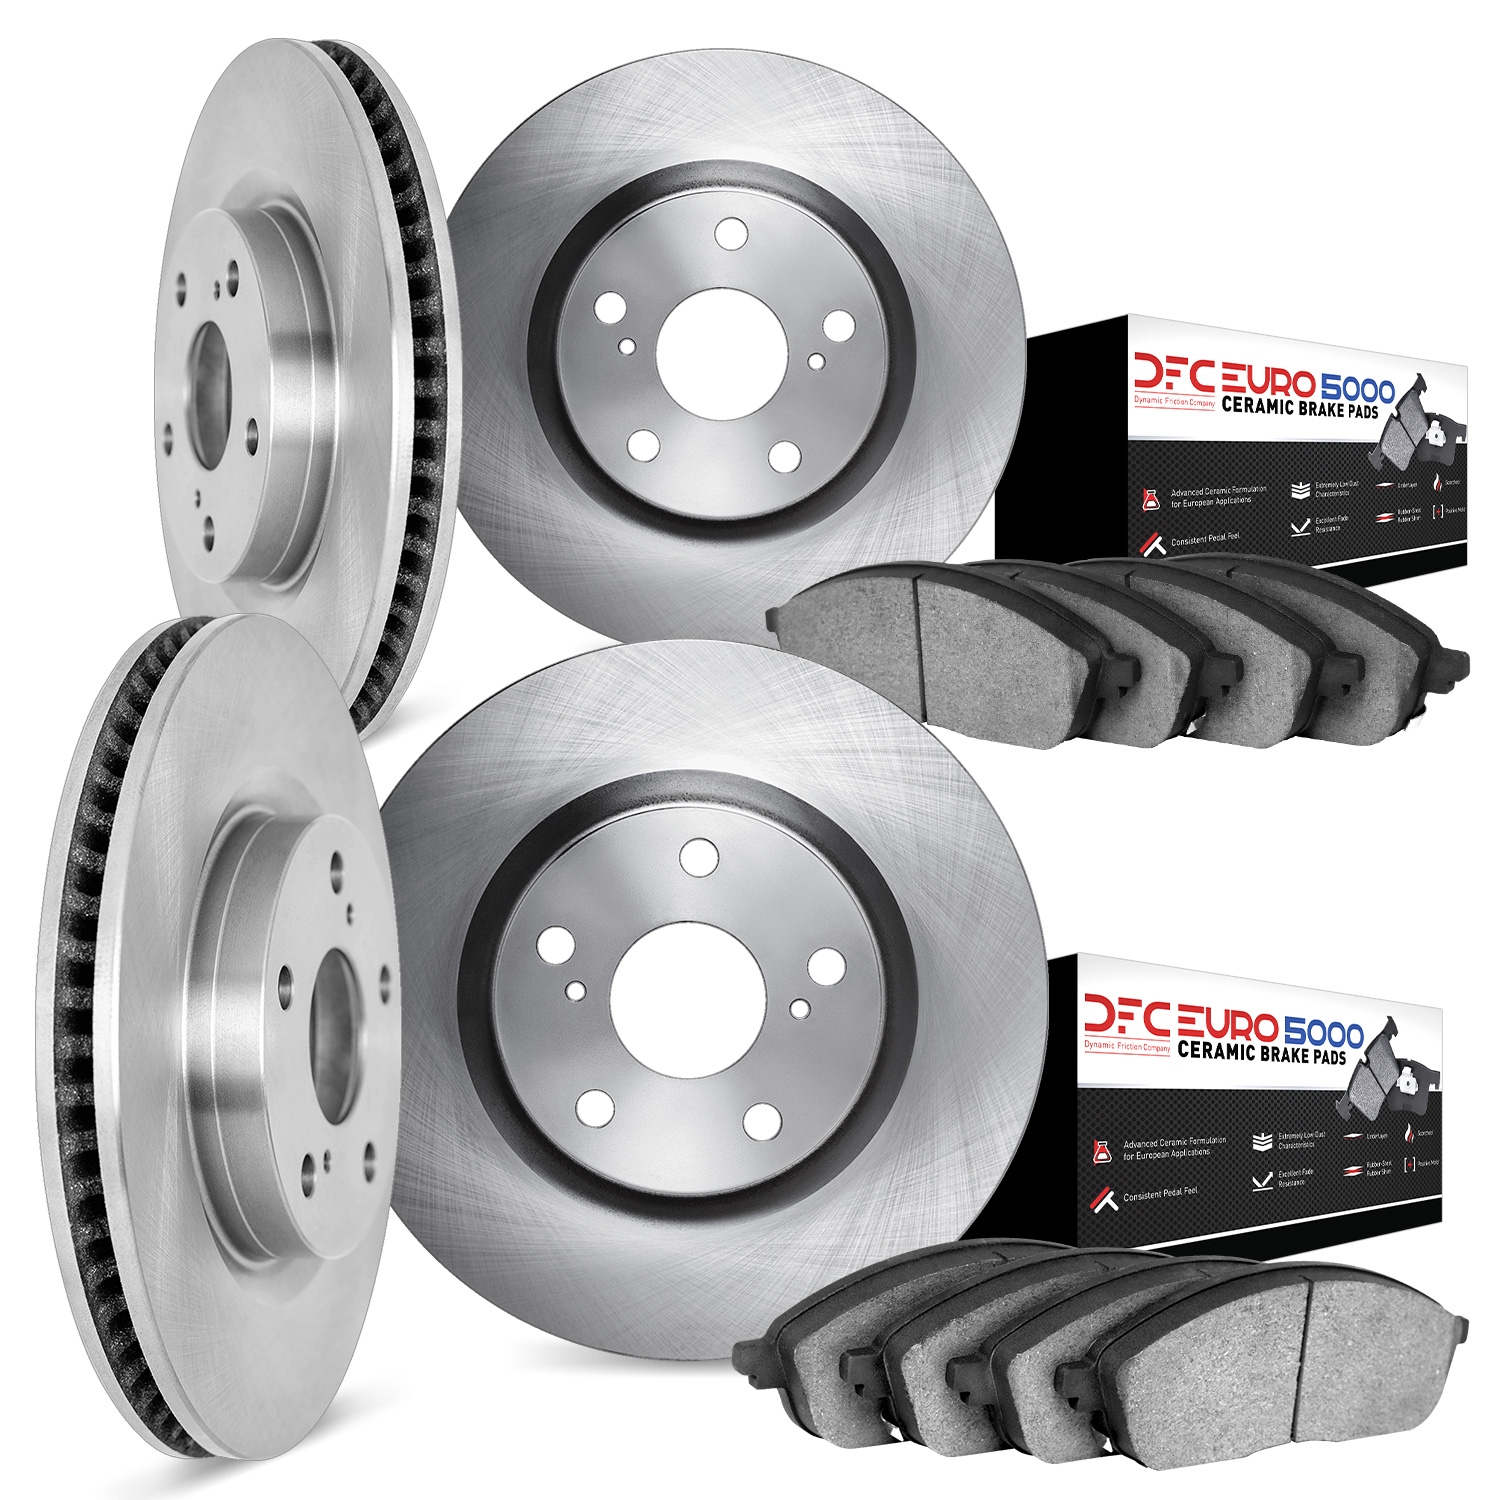 6604-31027 Brake Rotors w/5000 Euro Ceramic Brake Pads, 2012-2016 BMW, Position: Front and Rear